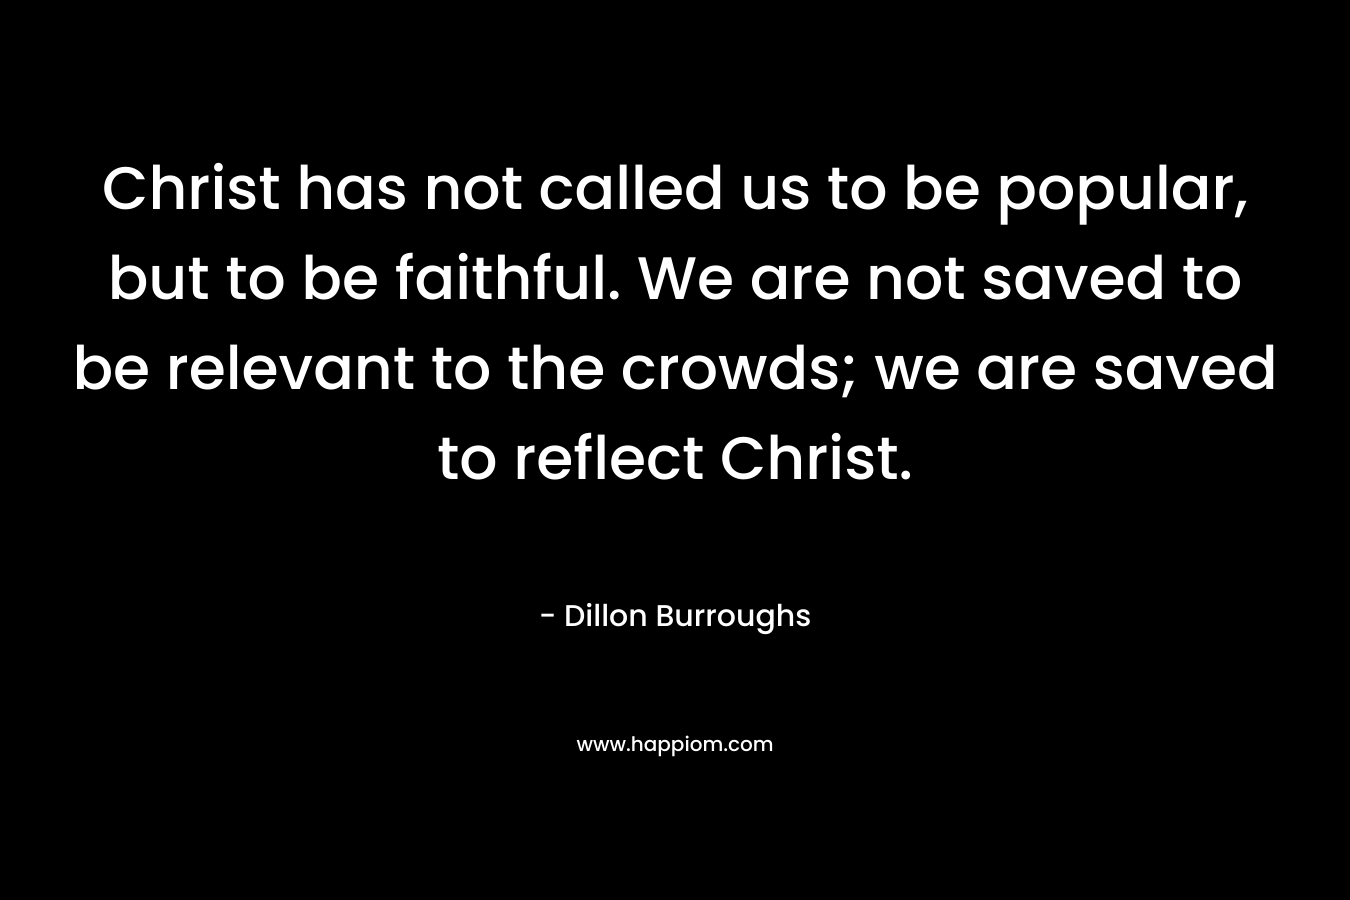 Christ has not called us to be popular, but to be faithful. We are not saved to be relevant to the crowds; we are saved to reflect Christ. – Dillon Burroughs